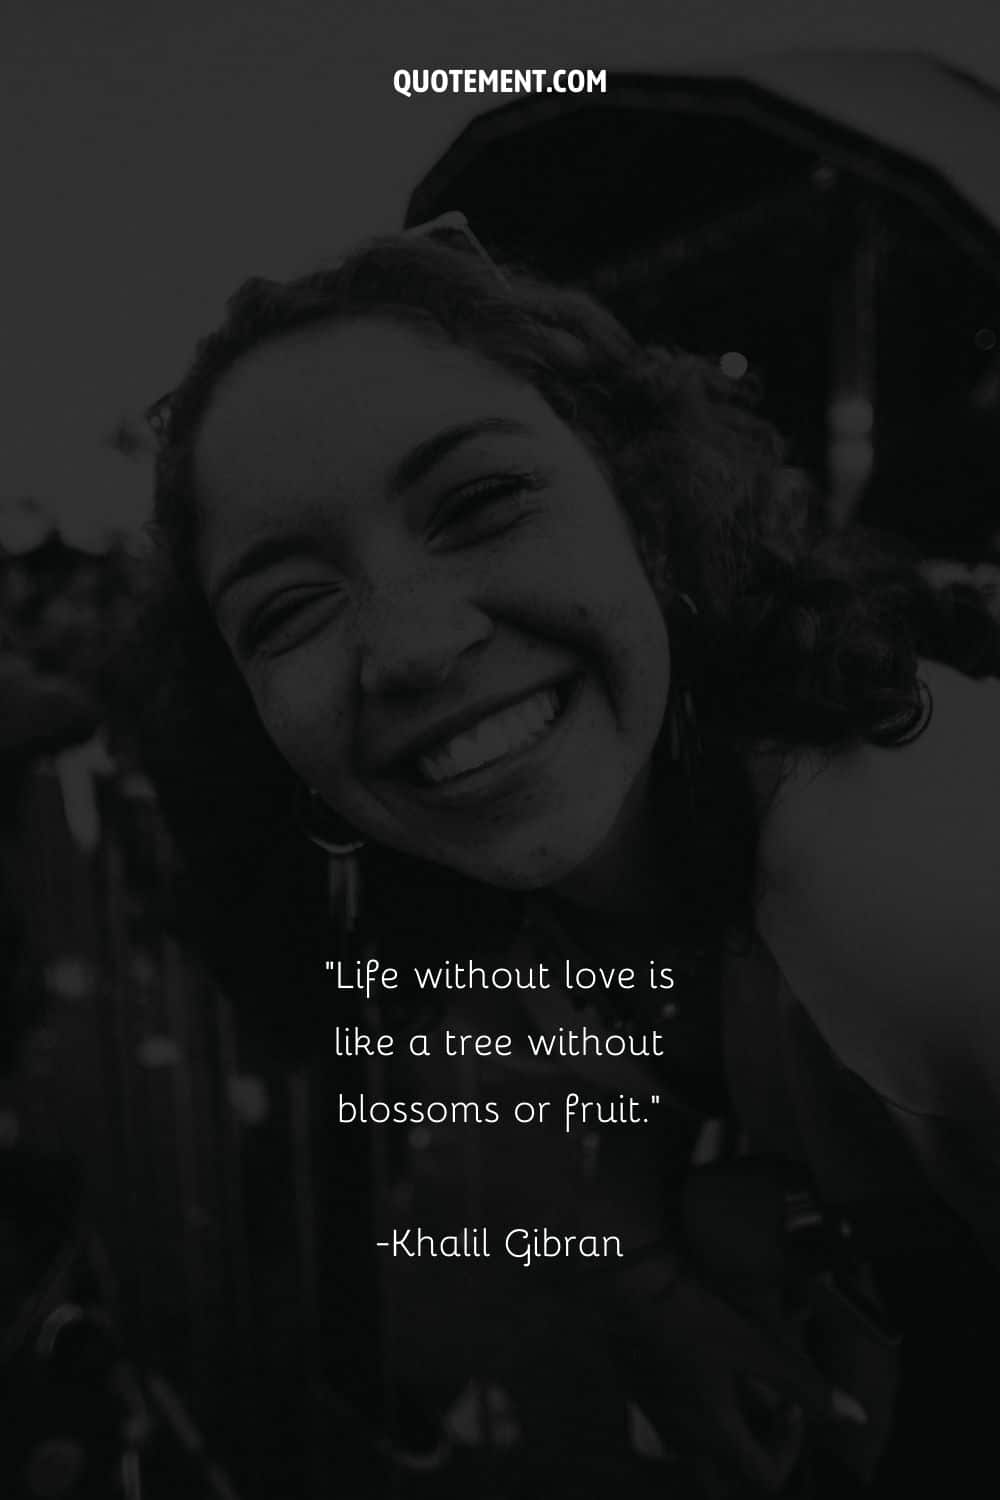 Monochrome image of a girl's laughter representing a quote on love
